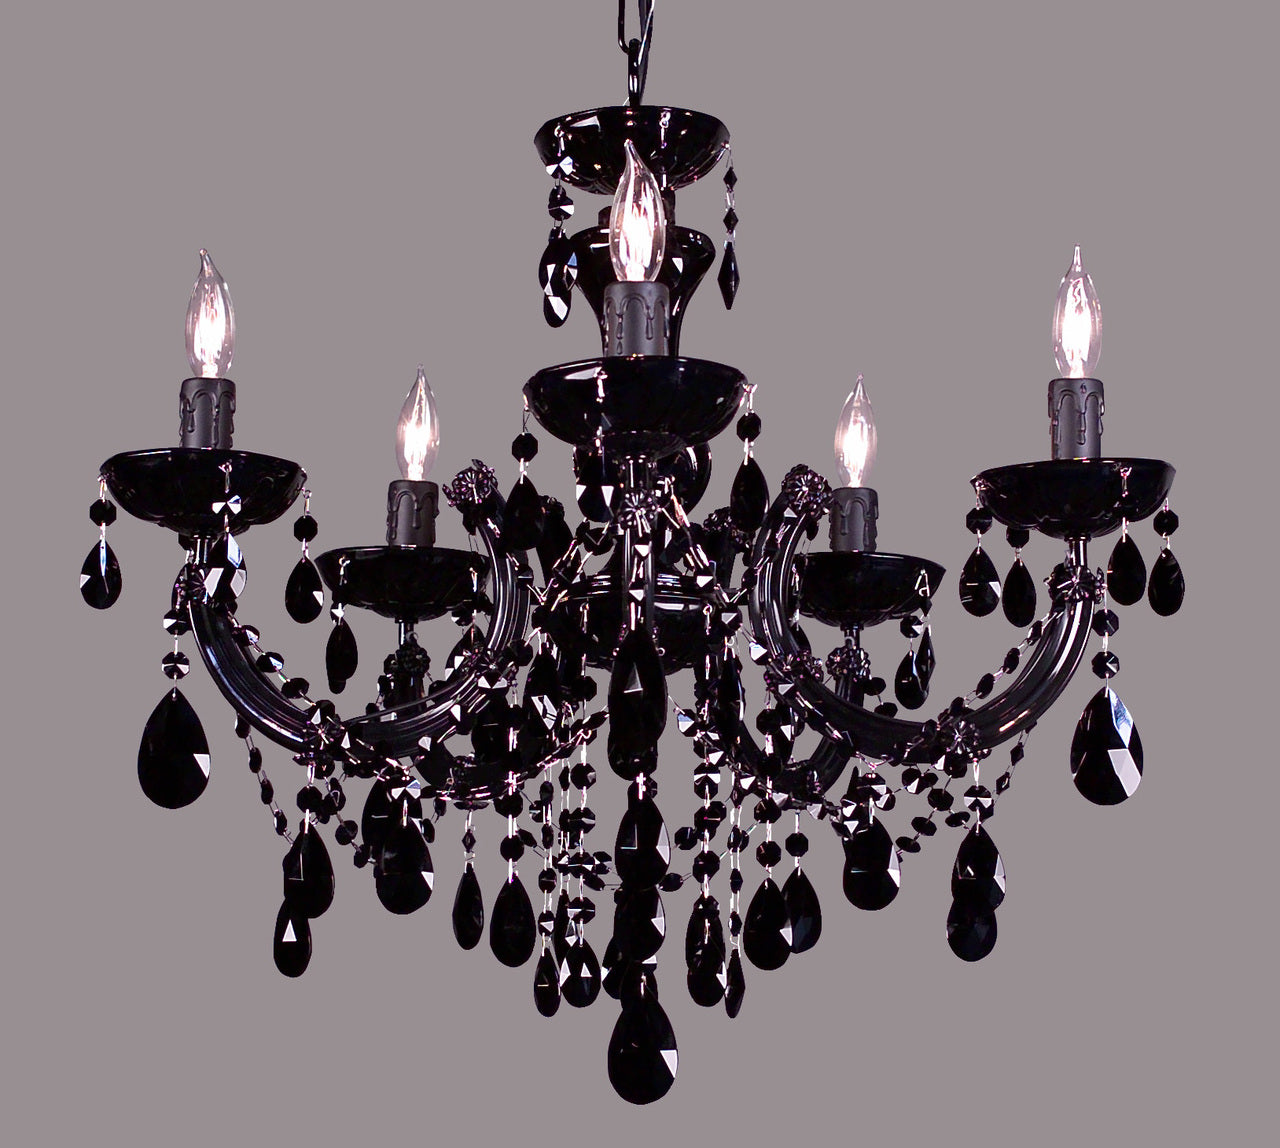 Classic Lighting 8345 BBLK SJT Rialto Traditional Crystal Chandelier in Black